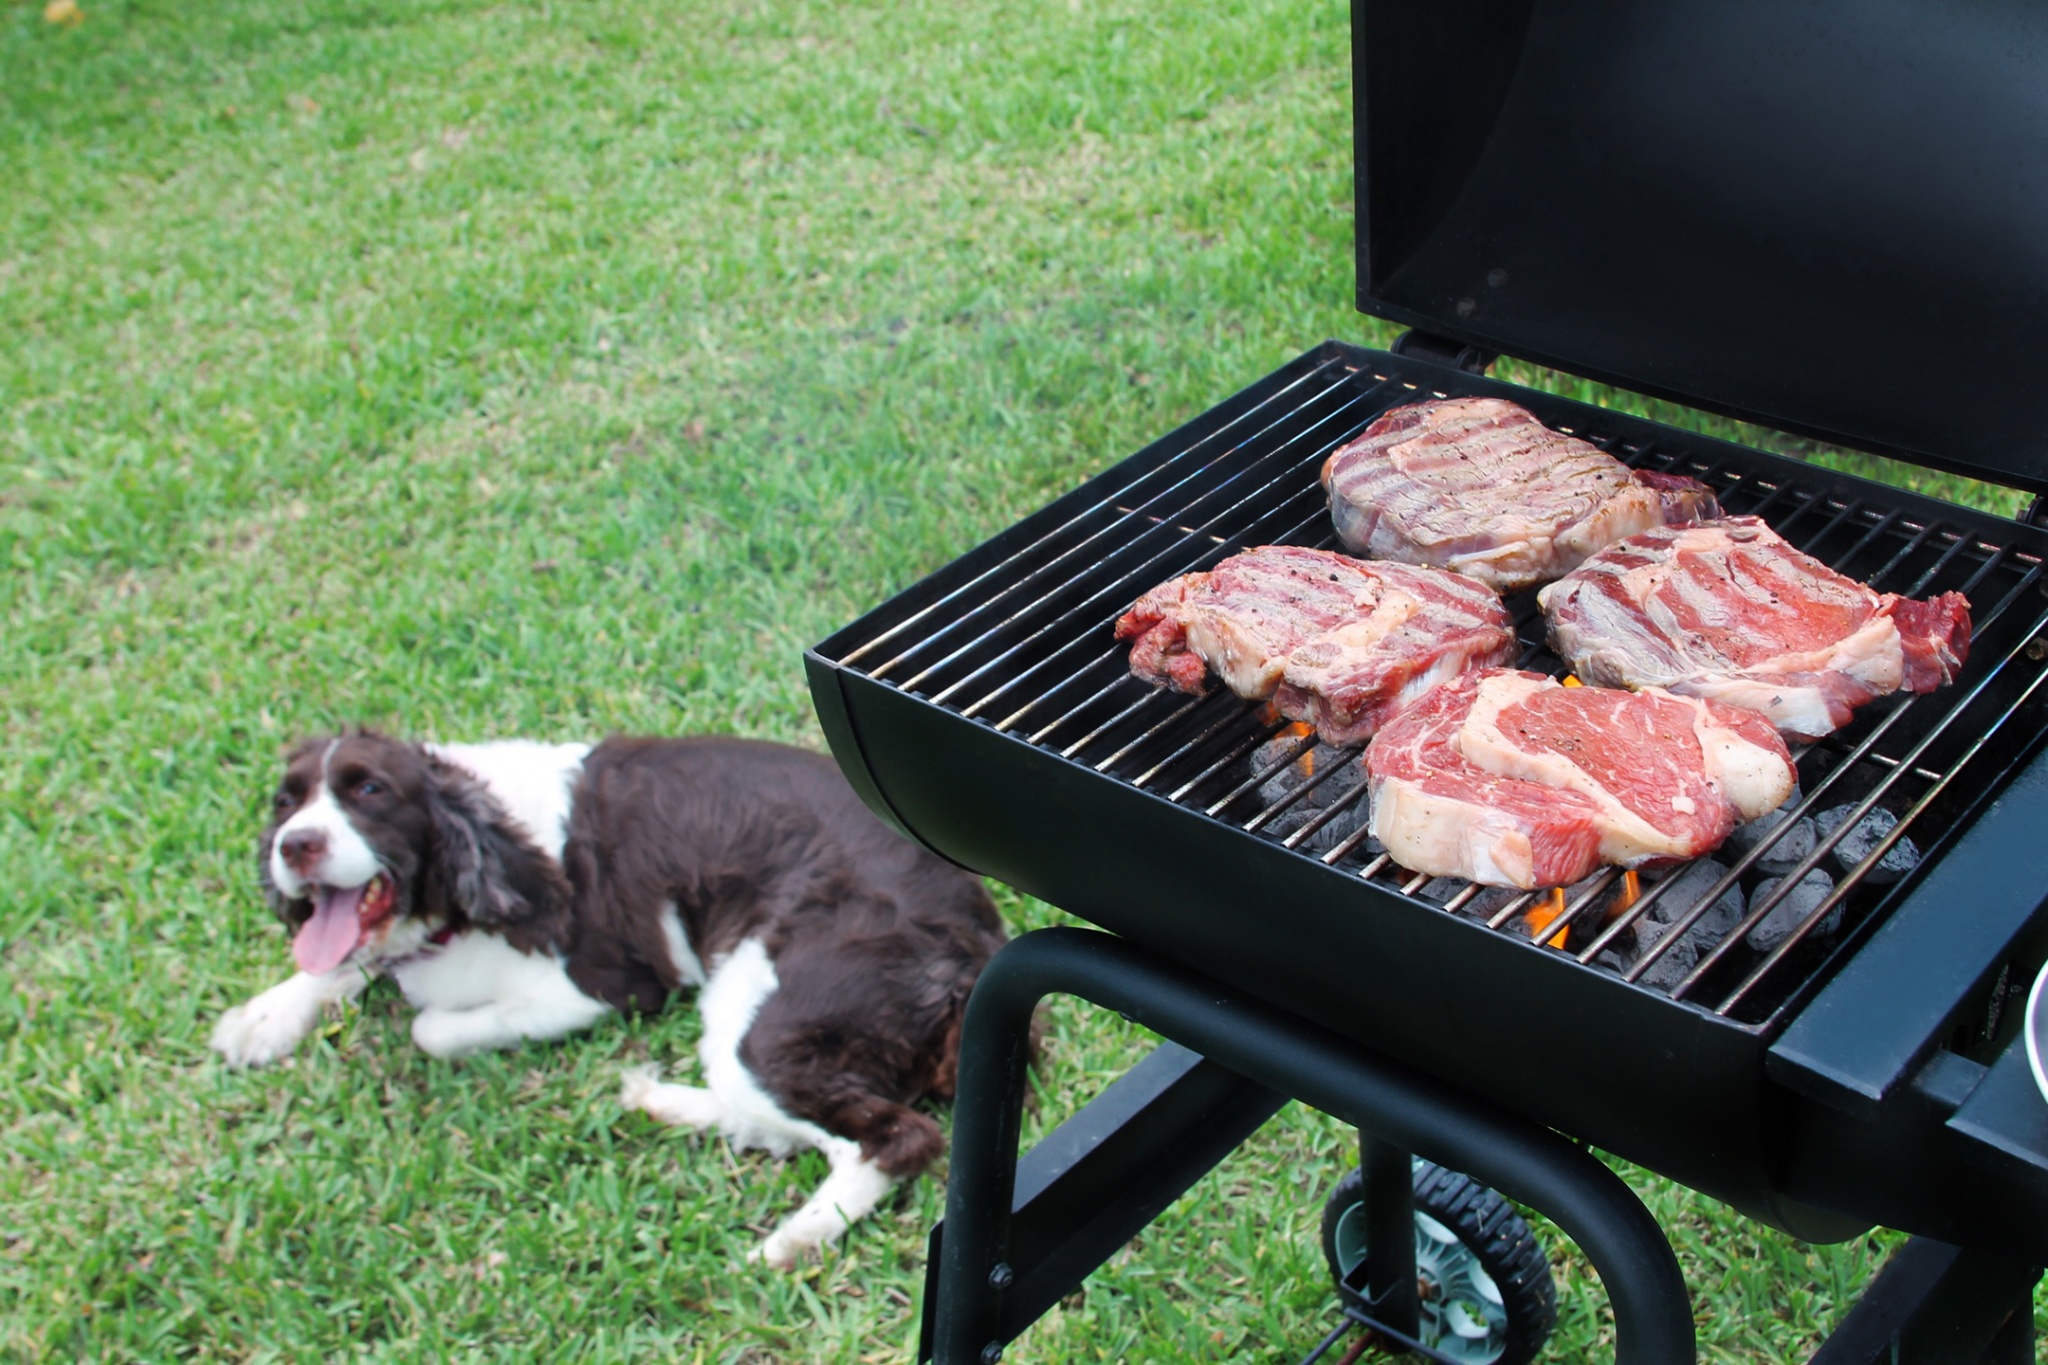 grilling steaks with dog in the background